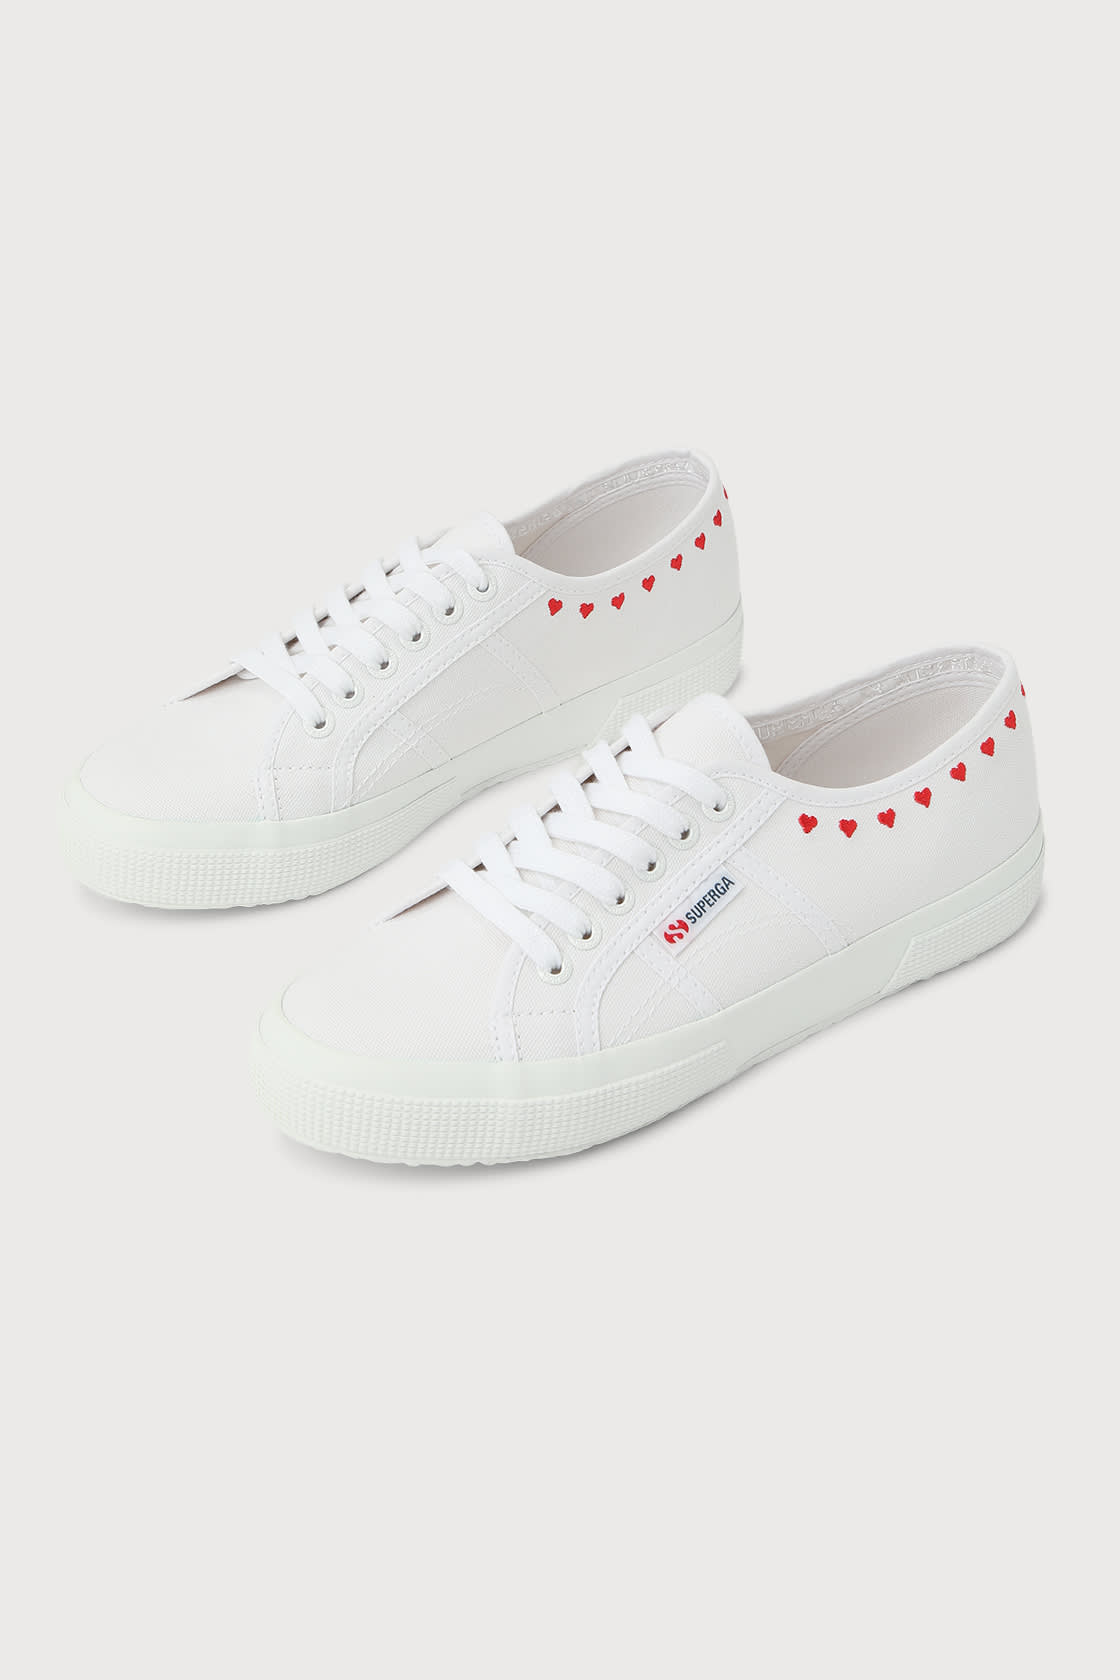 Superga 2750 Little Hearts Embroidered - Canvas Sneakers - Lulus